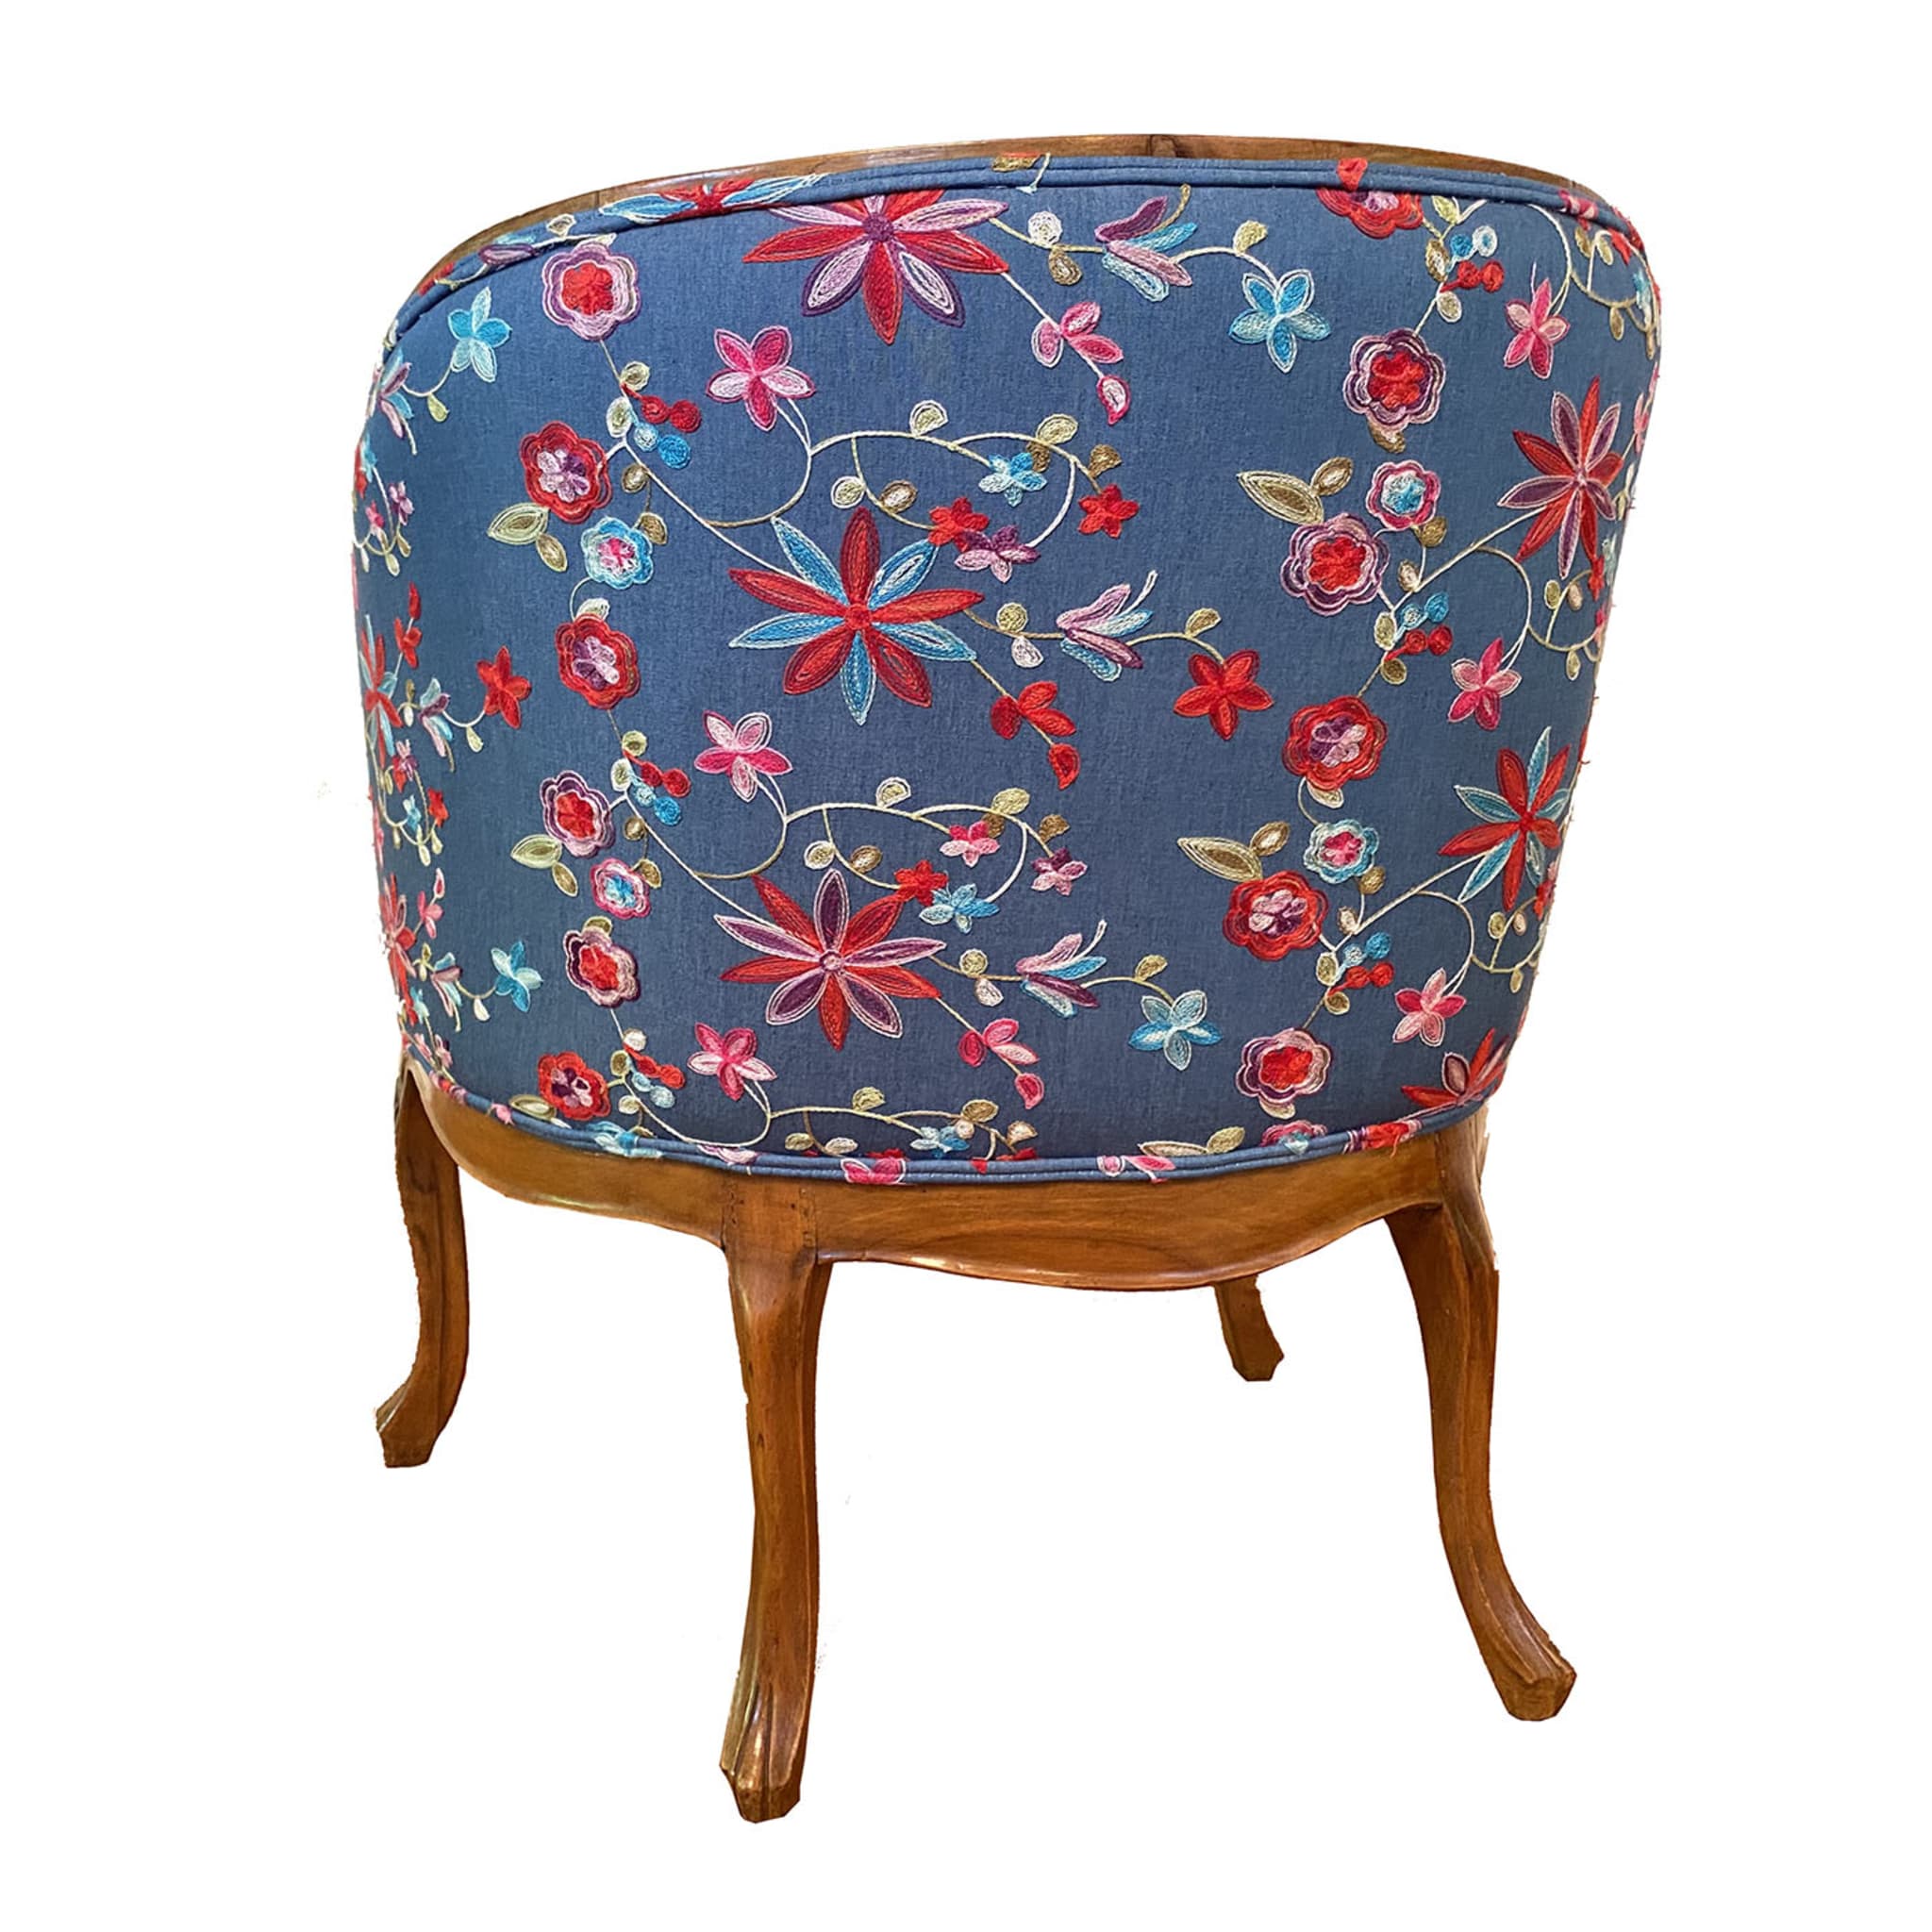 Embroidered Floral Cockpit Armchair - Alternative view 4